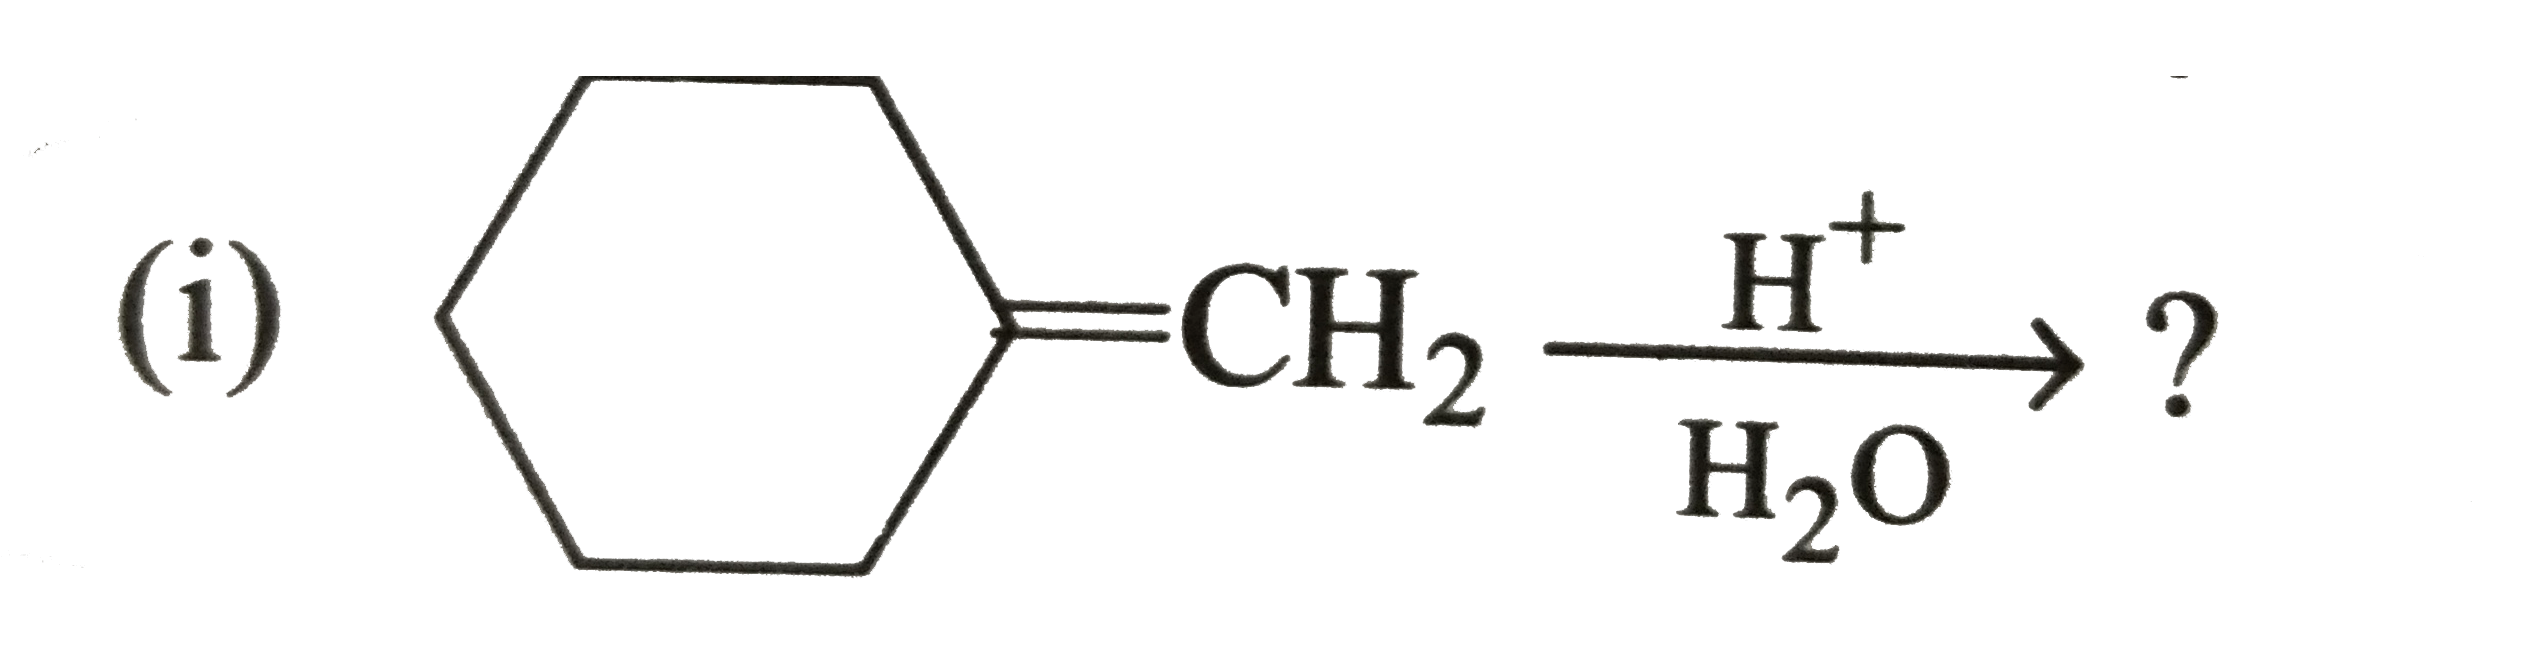 Give the major products of hydration of the following alkenes :     (ii) CH(3)-underset(CH(3))underset(|)(C)H-CH=CH(2)underset(HOH)overset(D^(+))(rarr) ?     (iii) C(3)H(6)(CH(3)-CH=CH(2))underset(HOH)overset(D^(+))(rarr)?   (iv) C(3)H(6)(CH(3)-CH=CH(2))underset(D(2)O)overset(D^(+))(rarr)?    (v) C(3)H(6)(CH(3)-CH=C(2))underset(D(2)O)overset(H^(+))(rarr)